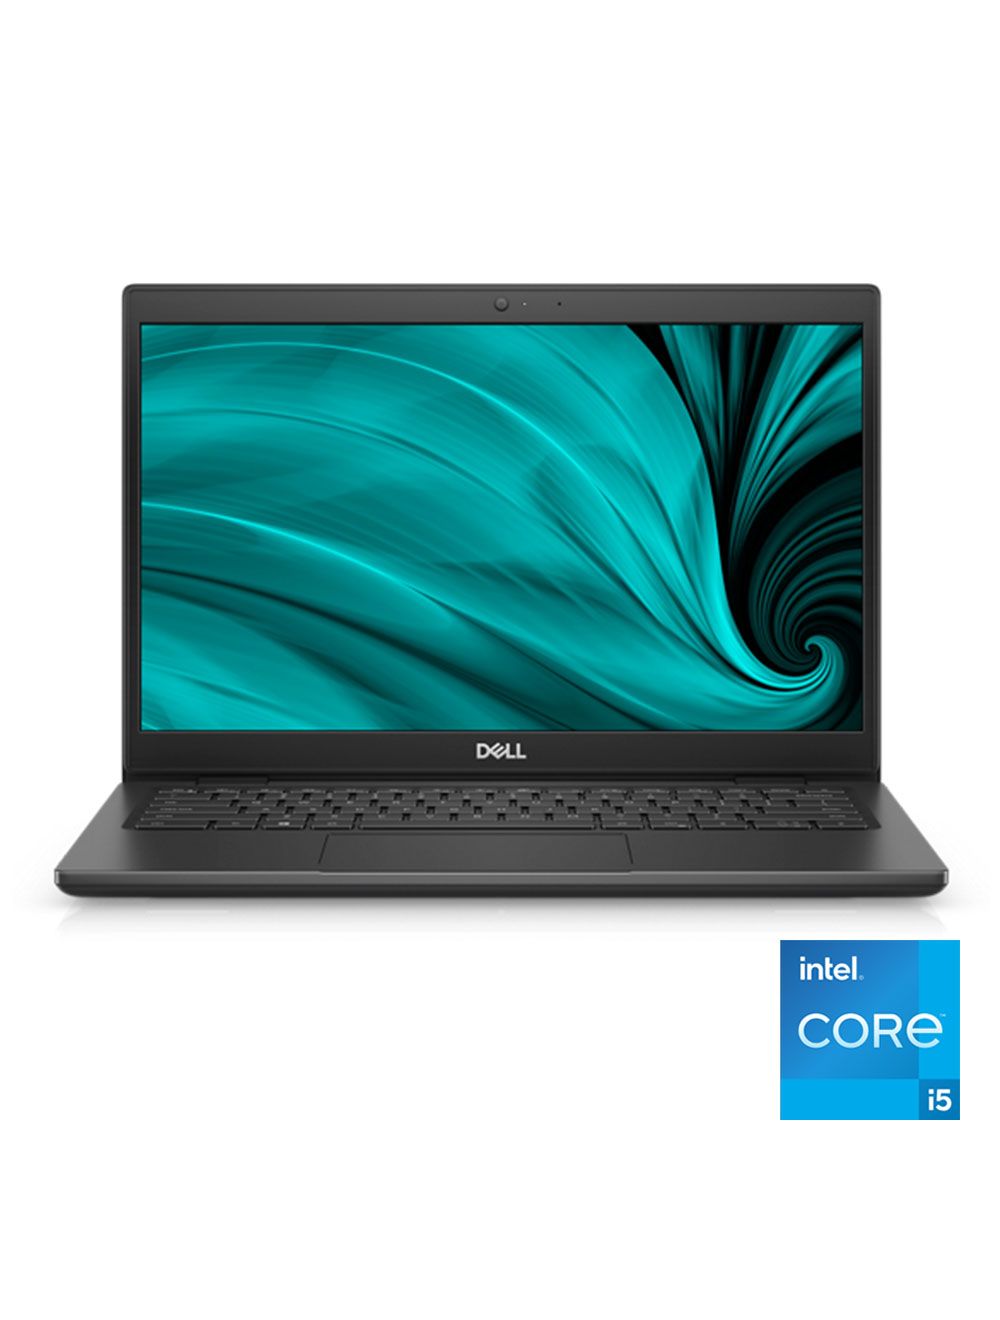 Dell Latitude 14 3420 review - some configurations are really good